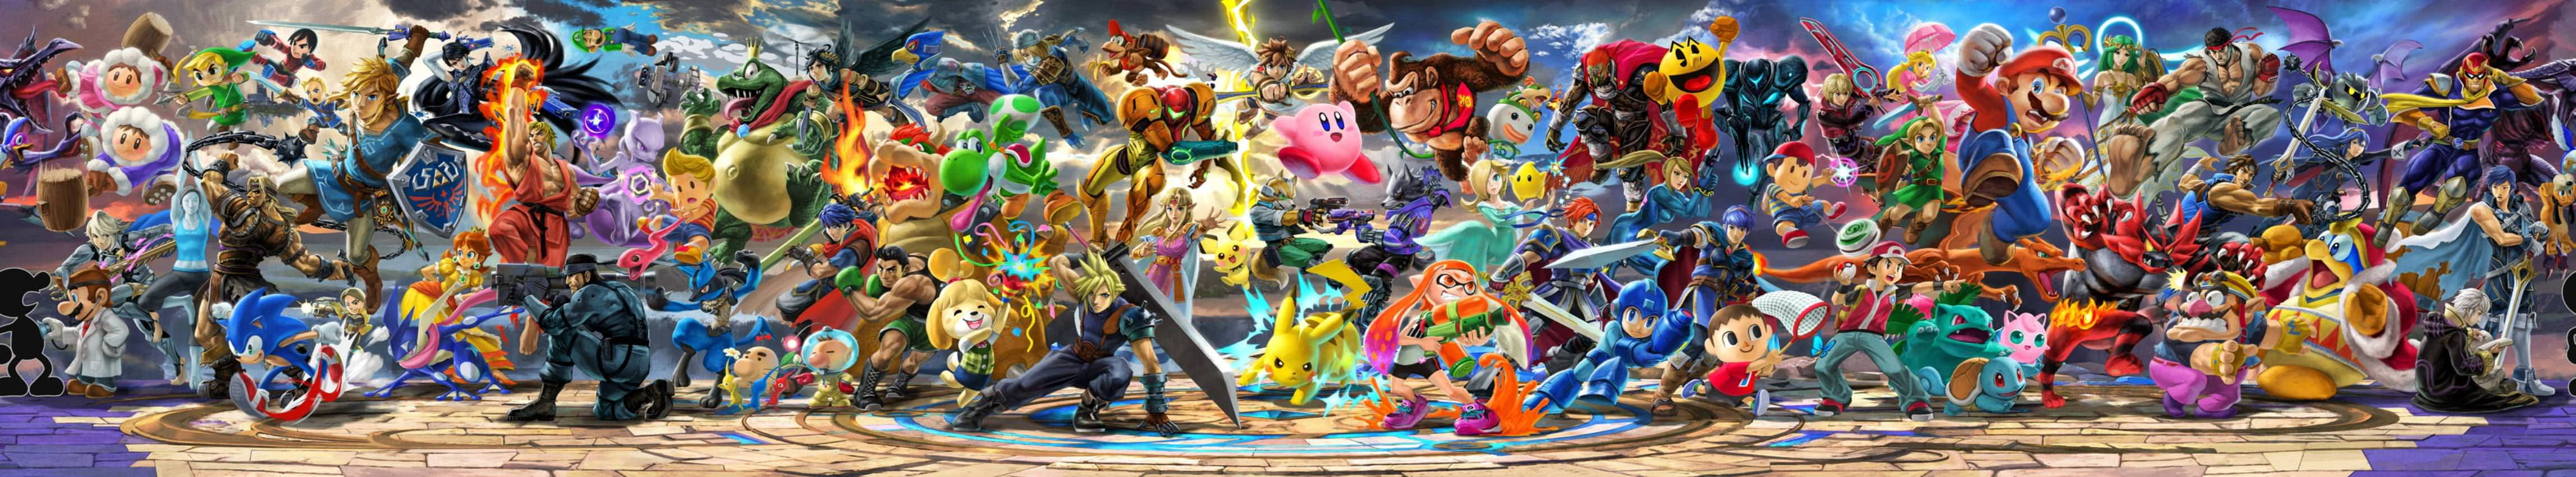 Smash Ultimate In Wide Angle